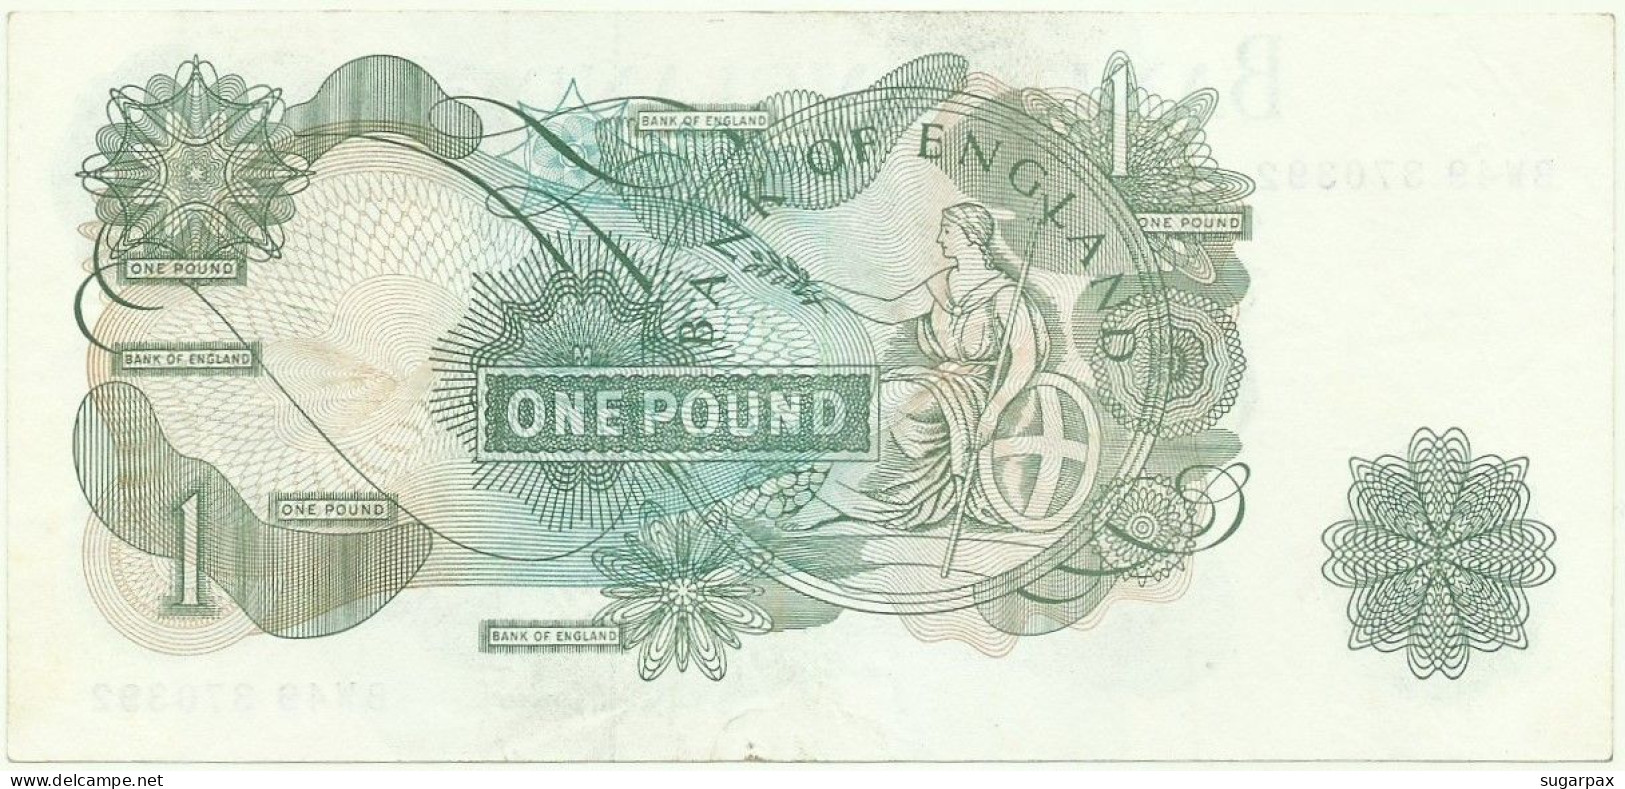 GREAT BRITAIN - 1 POUND - ND ( 1970-77 ) - P 374 G - Serie BW49 - BANK OF ENGLAND - United Kingdom - 1 Pound